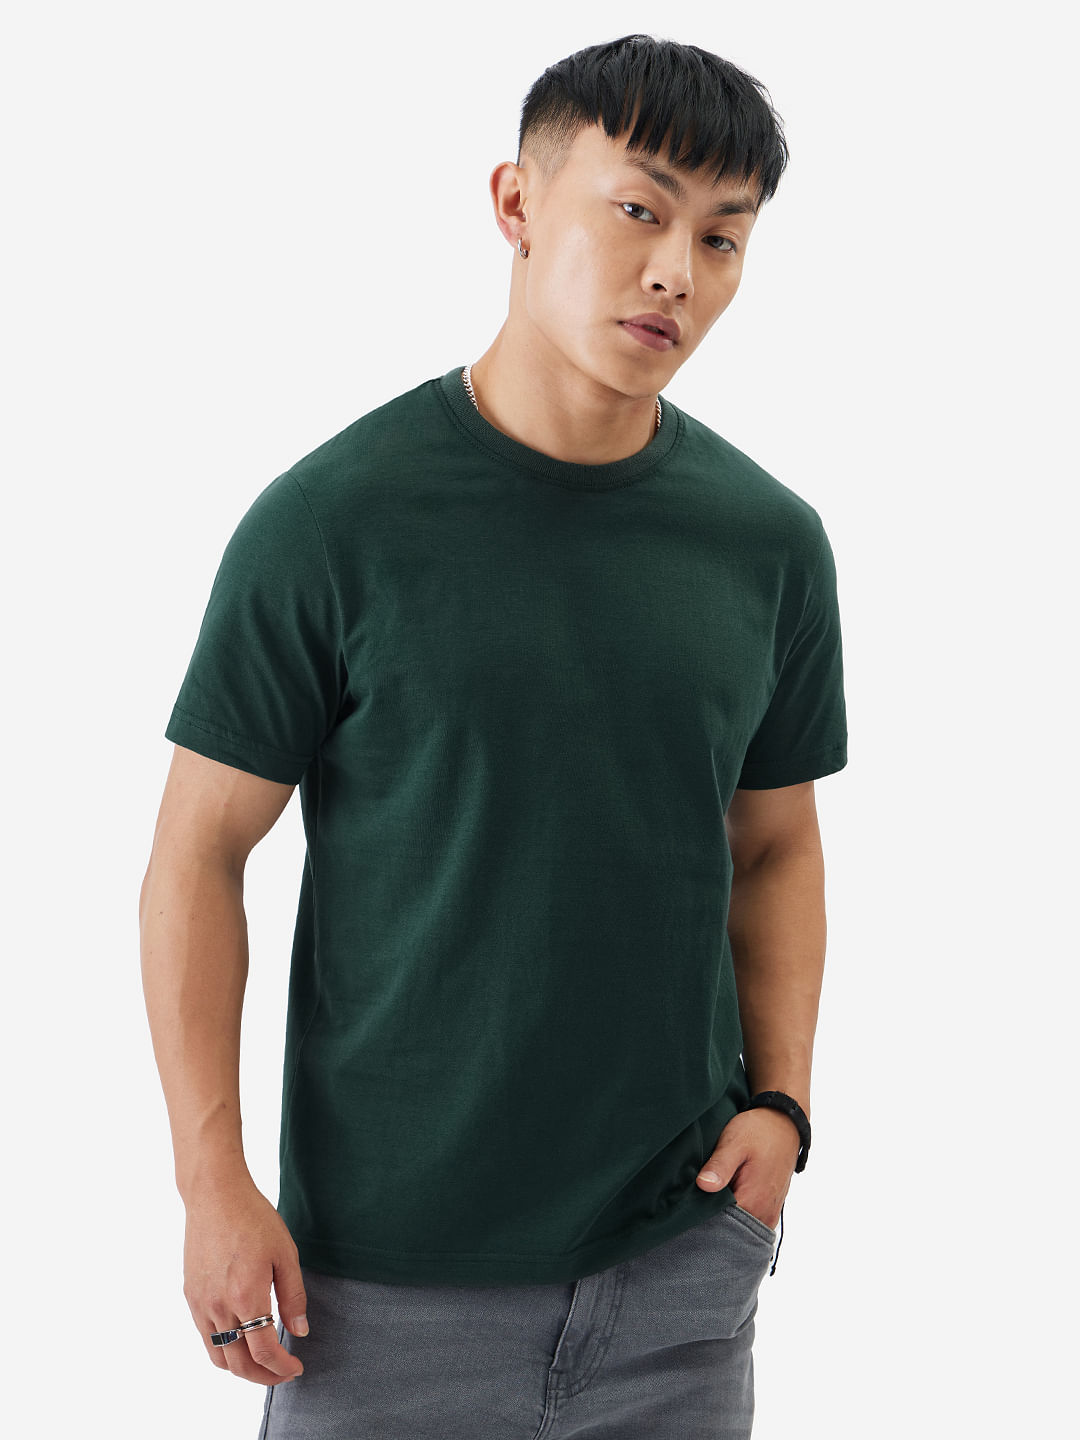 Buy Solids: Emerald Green T-Shirts Online